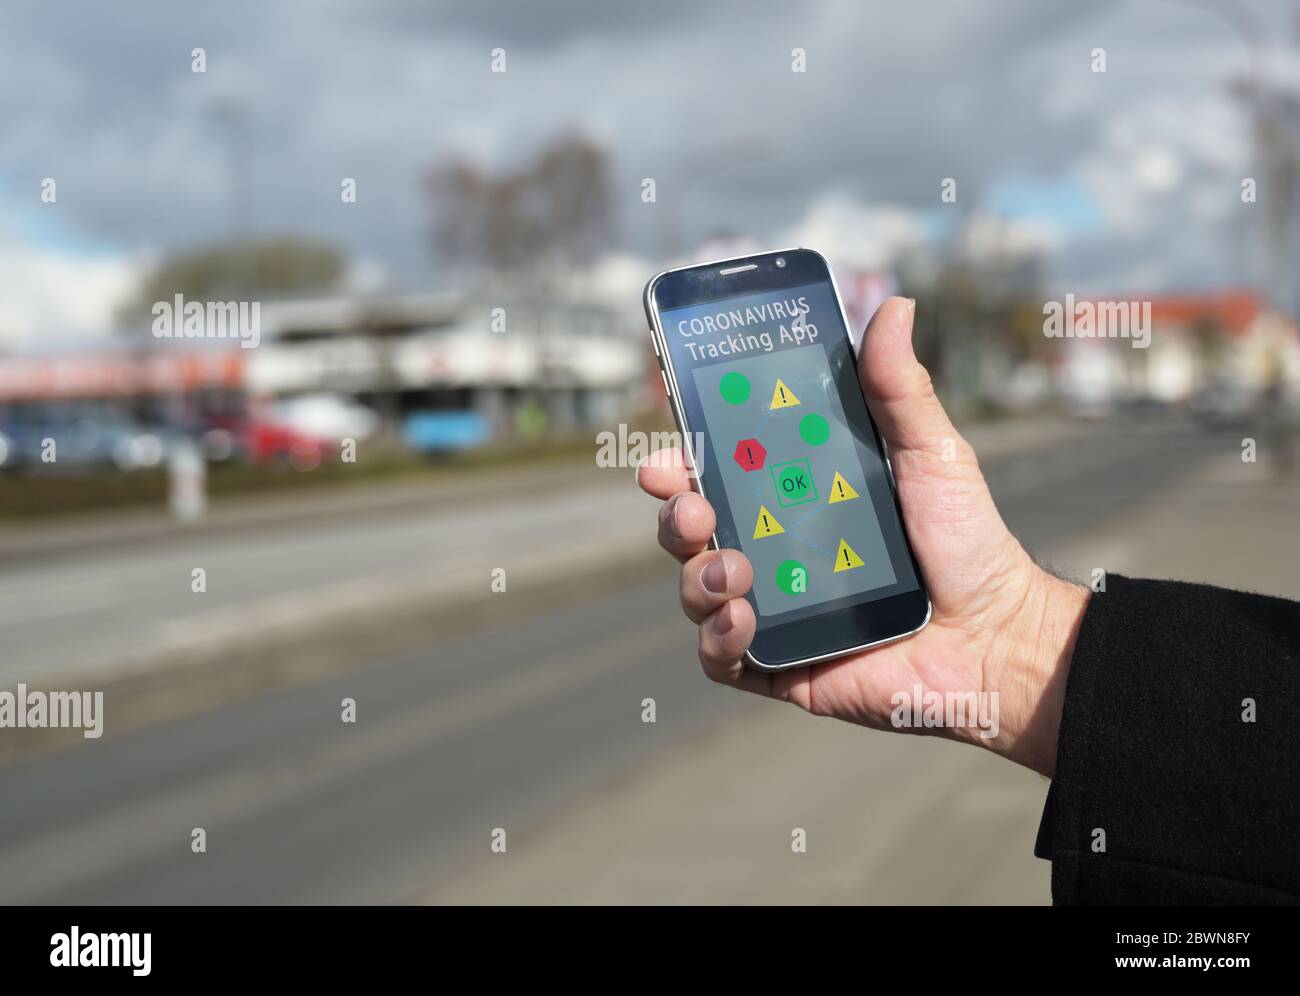 Hand is holding a smartphone with a coronavirus tracking app, which monitors contacts between people and shows the risk of infection, blurry city back Stock Photo